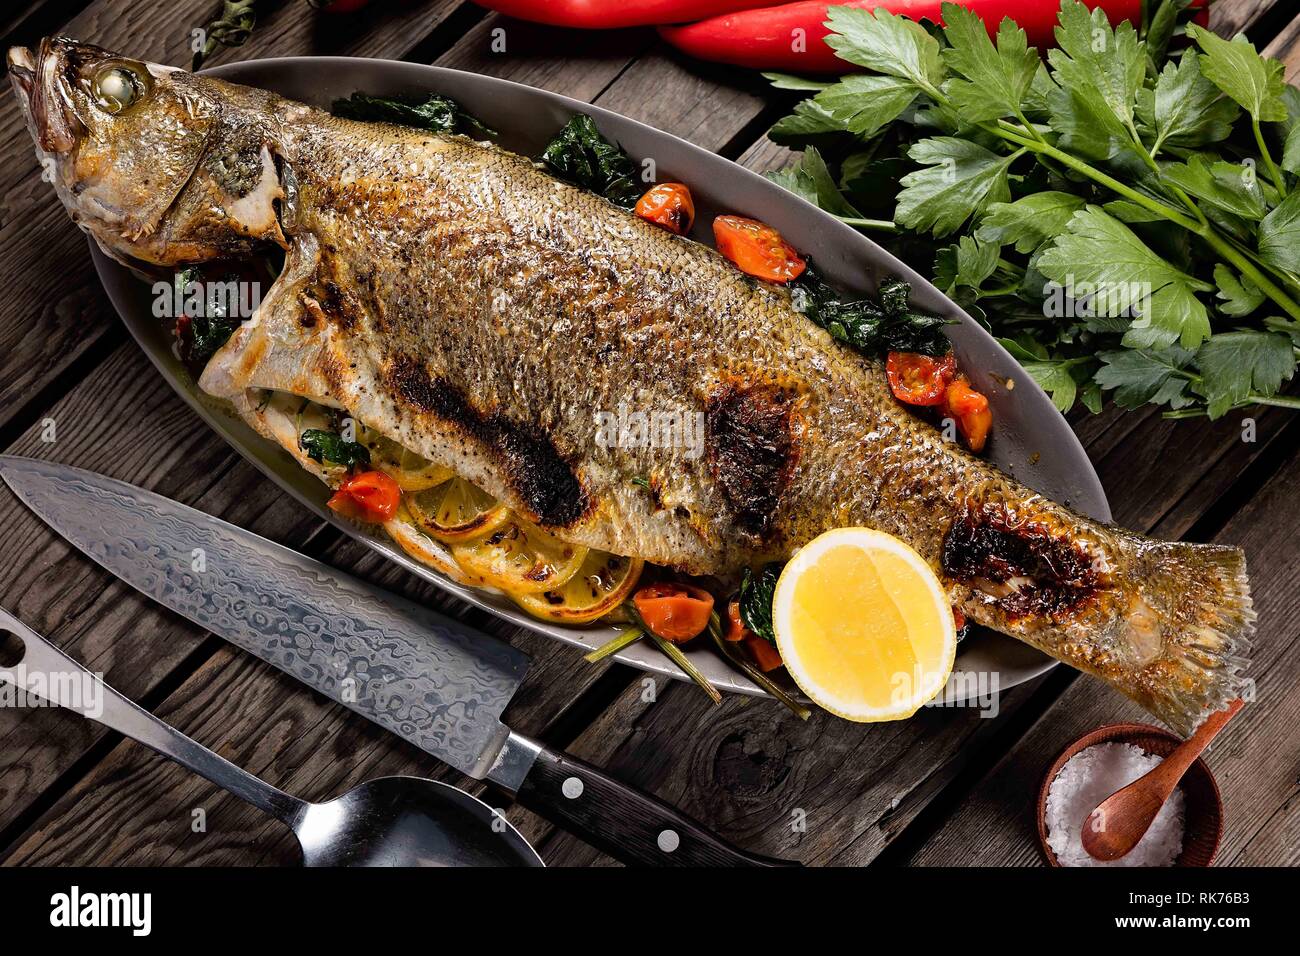 Beautiful whole fish grilled and served on a metal pan with tomato, lemon and herbs Stock Photo